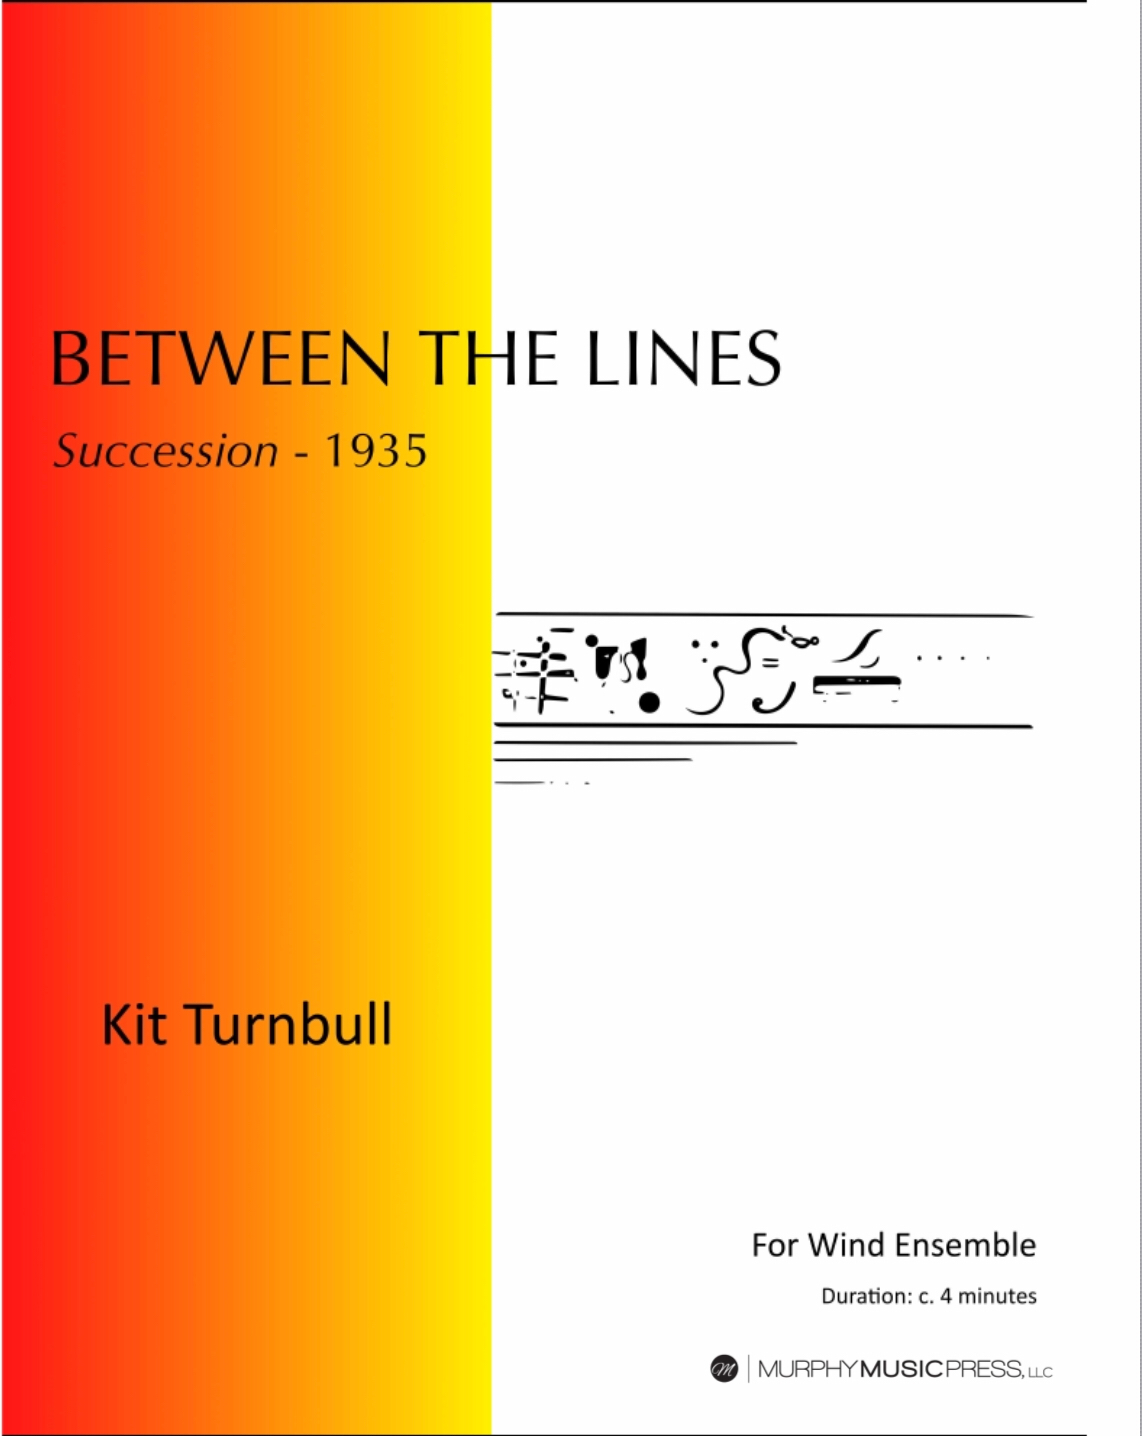 Between The Lines  by Kit Turnbull 